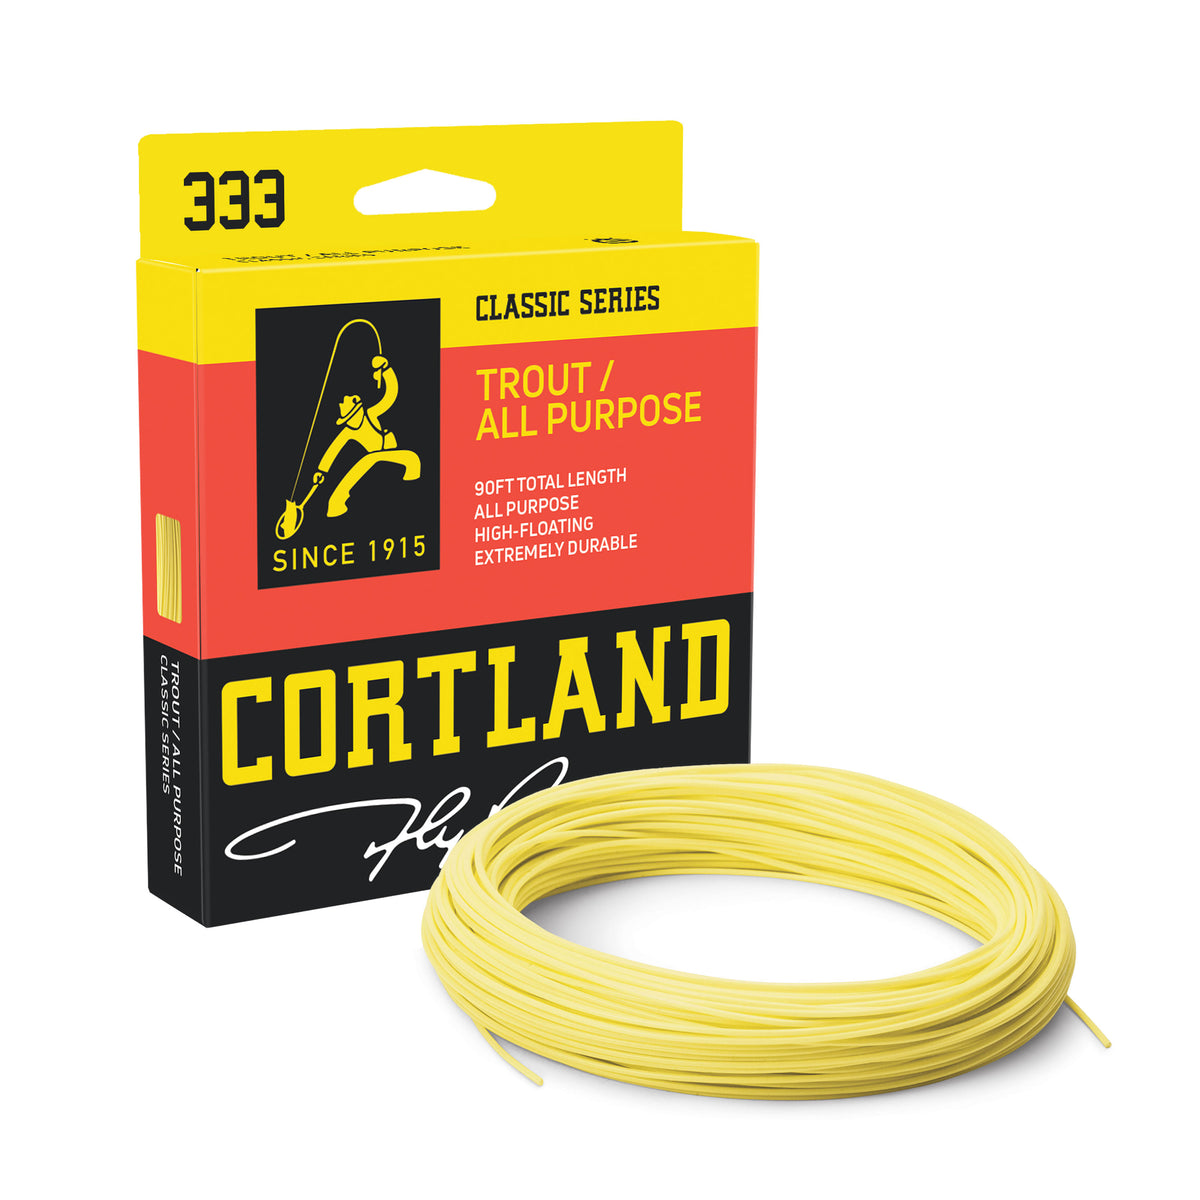 Fly Fishing Line All Purpose Trout Freshwater Fly Line WF8F 333 Classic Cortland 